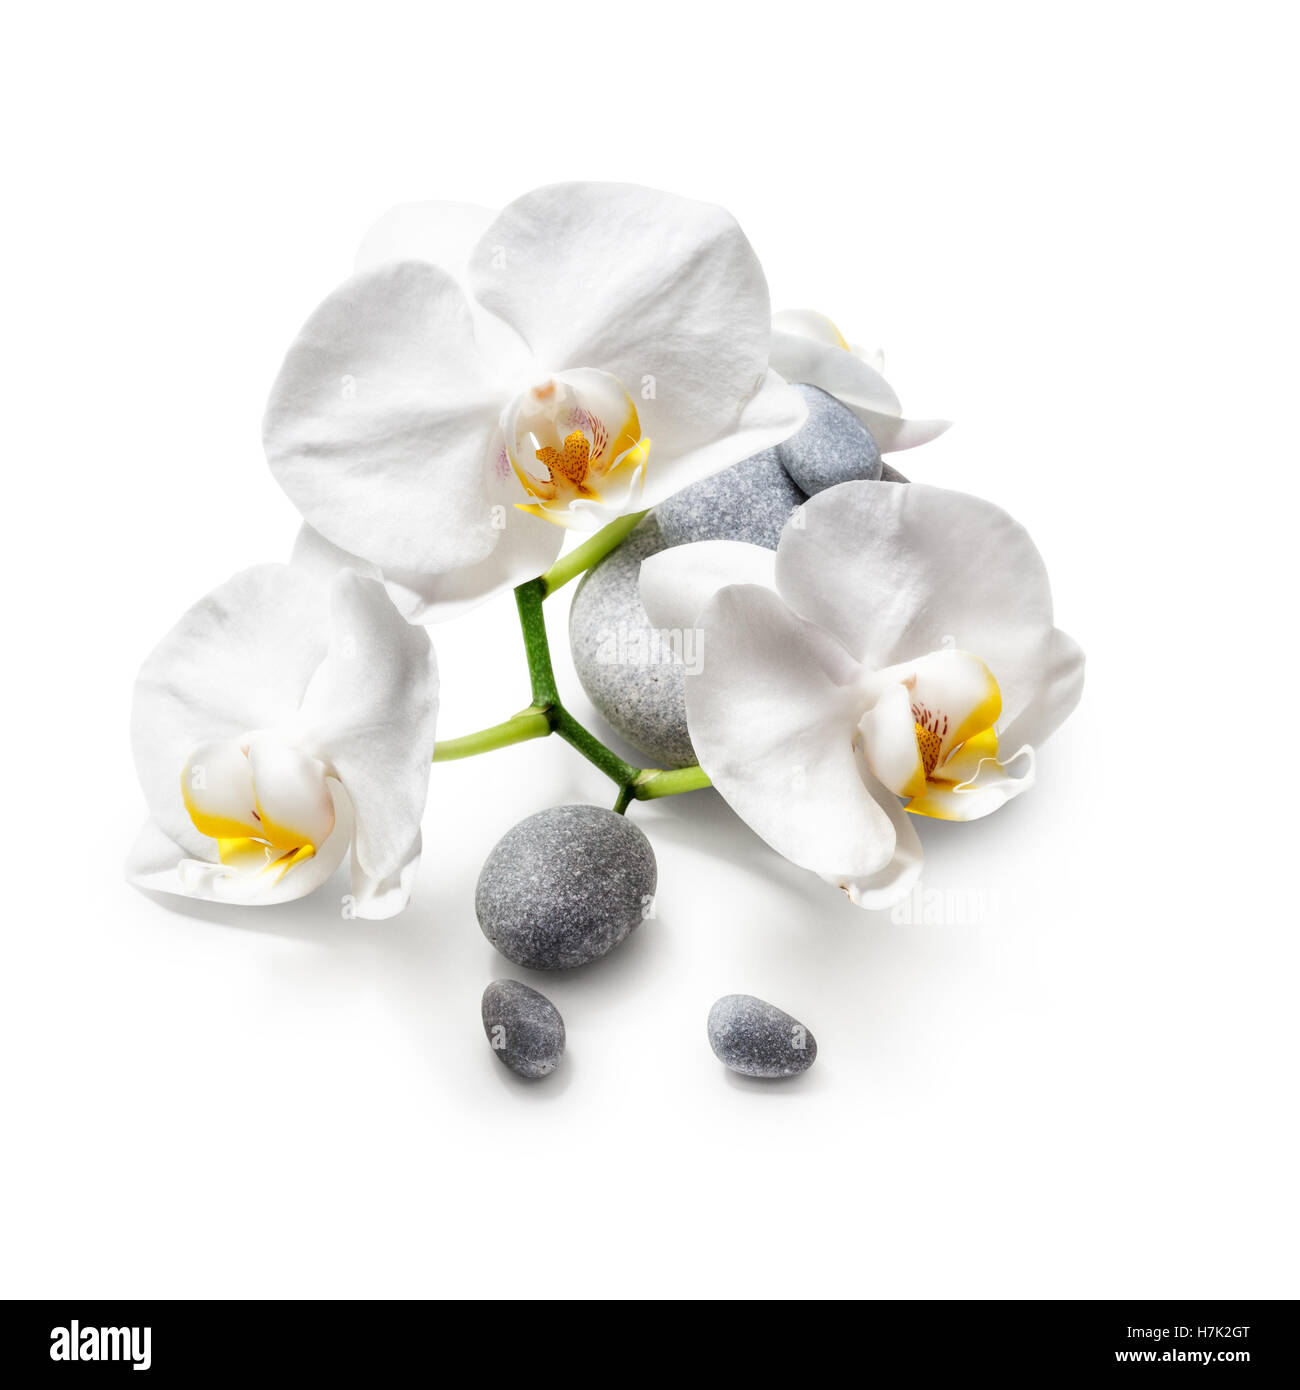 White orchid flowers and spa stones isolated on white background clipping path included Stock Photo